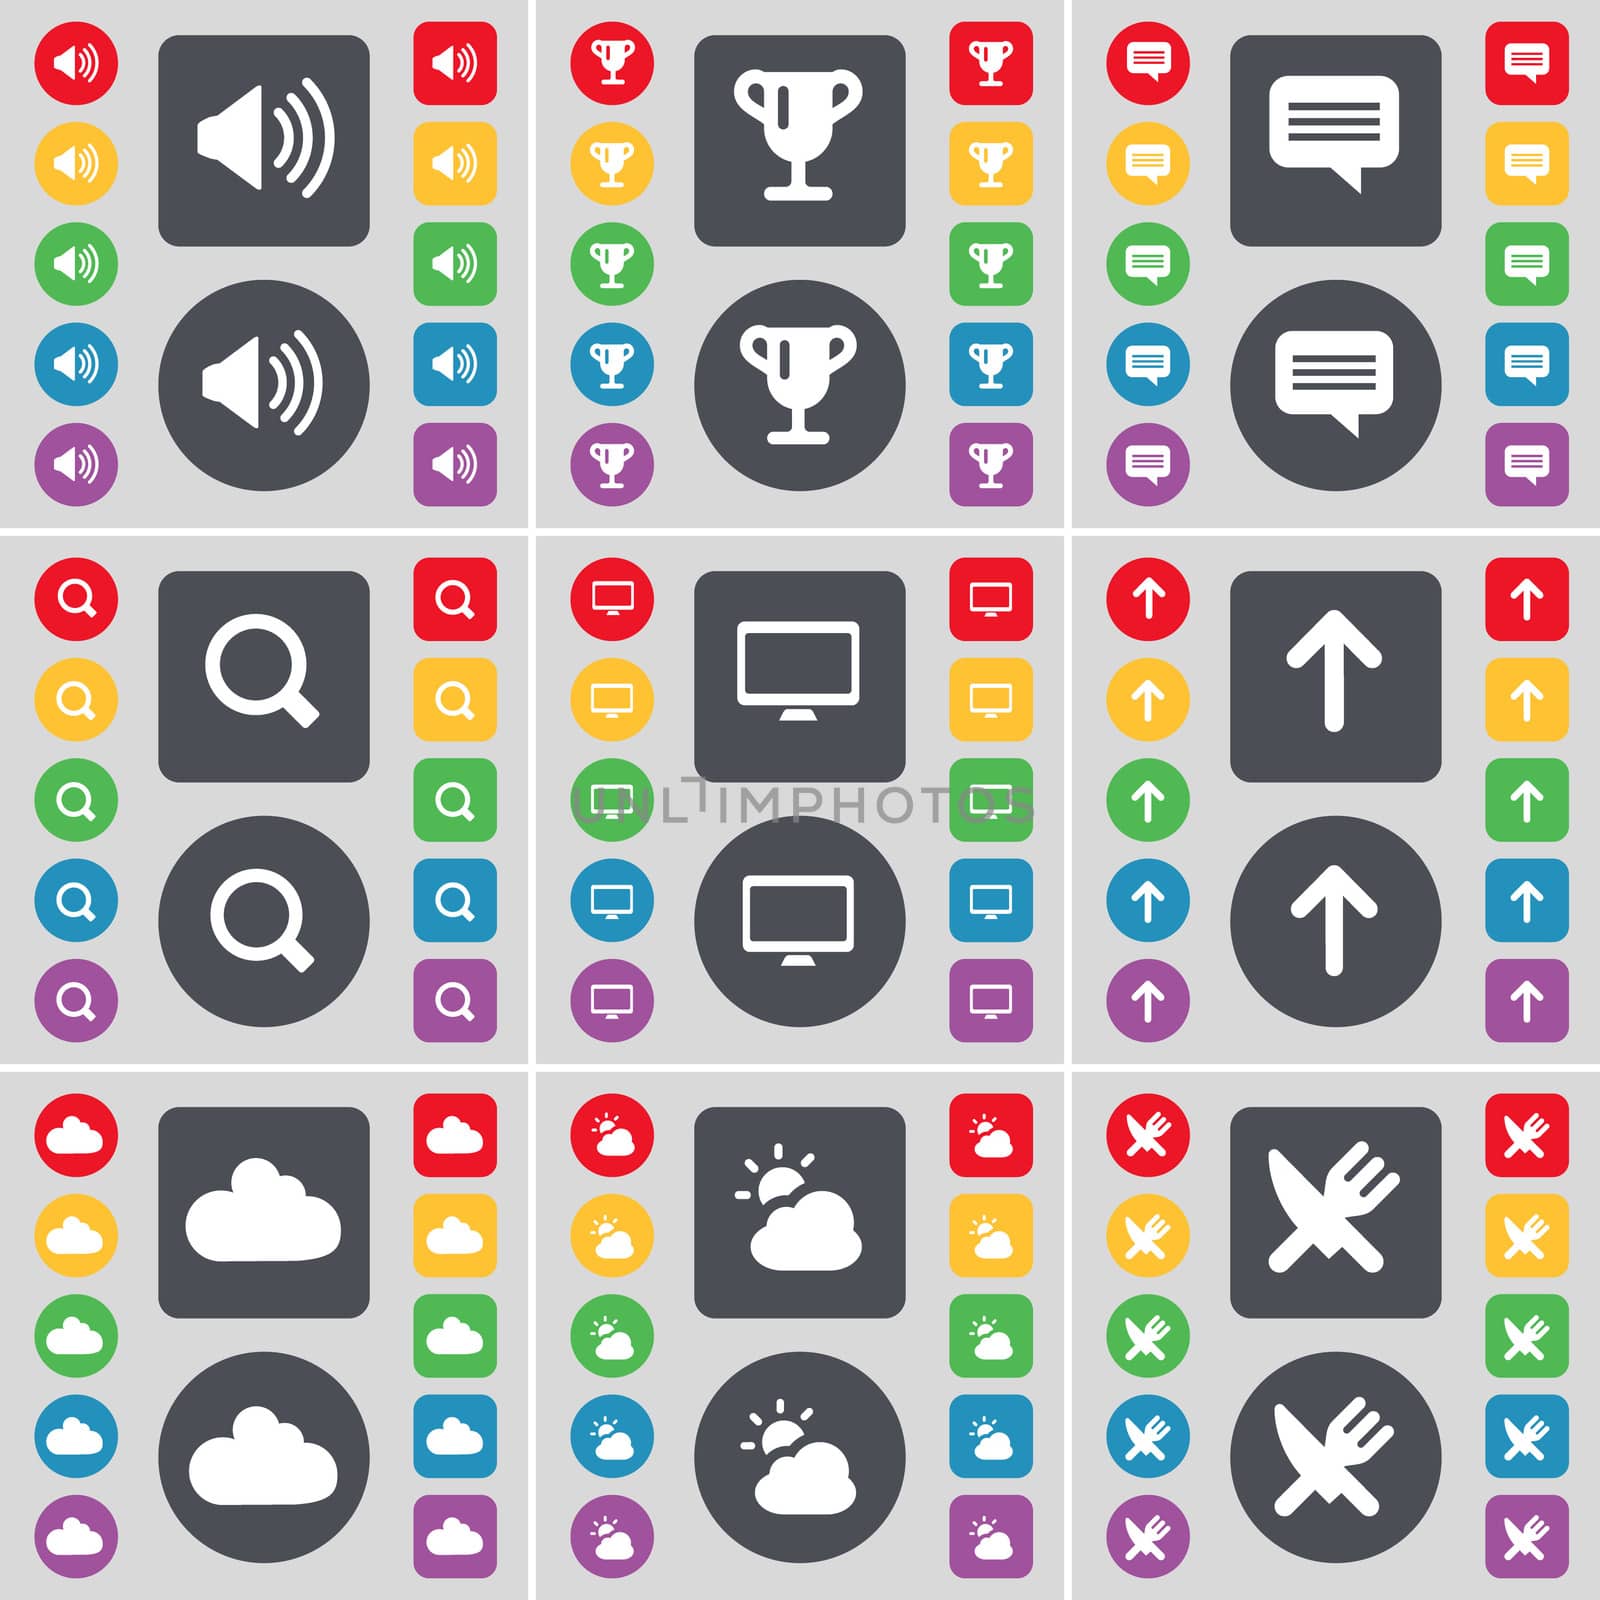 Sound, Cup, Chat, Magnifying glass, Monitor, Arrow up, Cloud, Fork and knife icon symbol. A large set of flat, colored buttons for your design. illustration